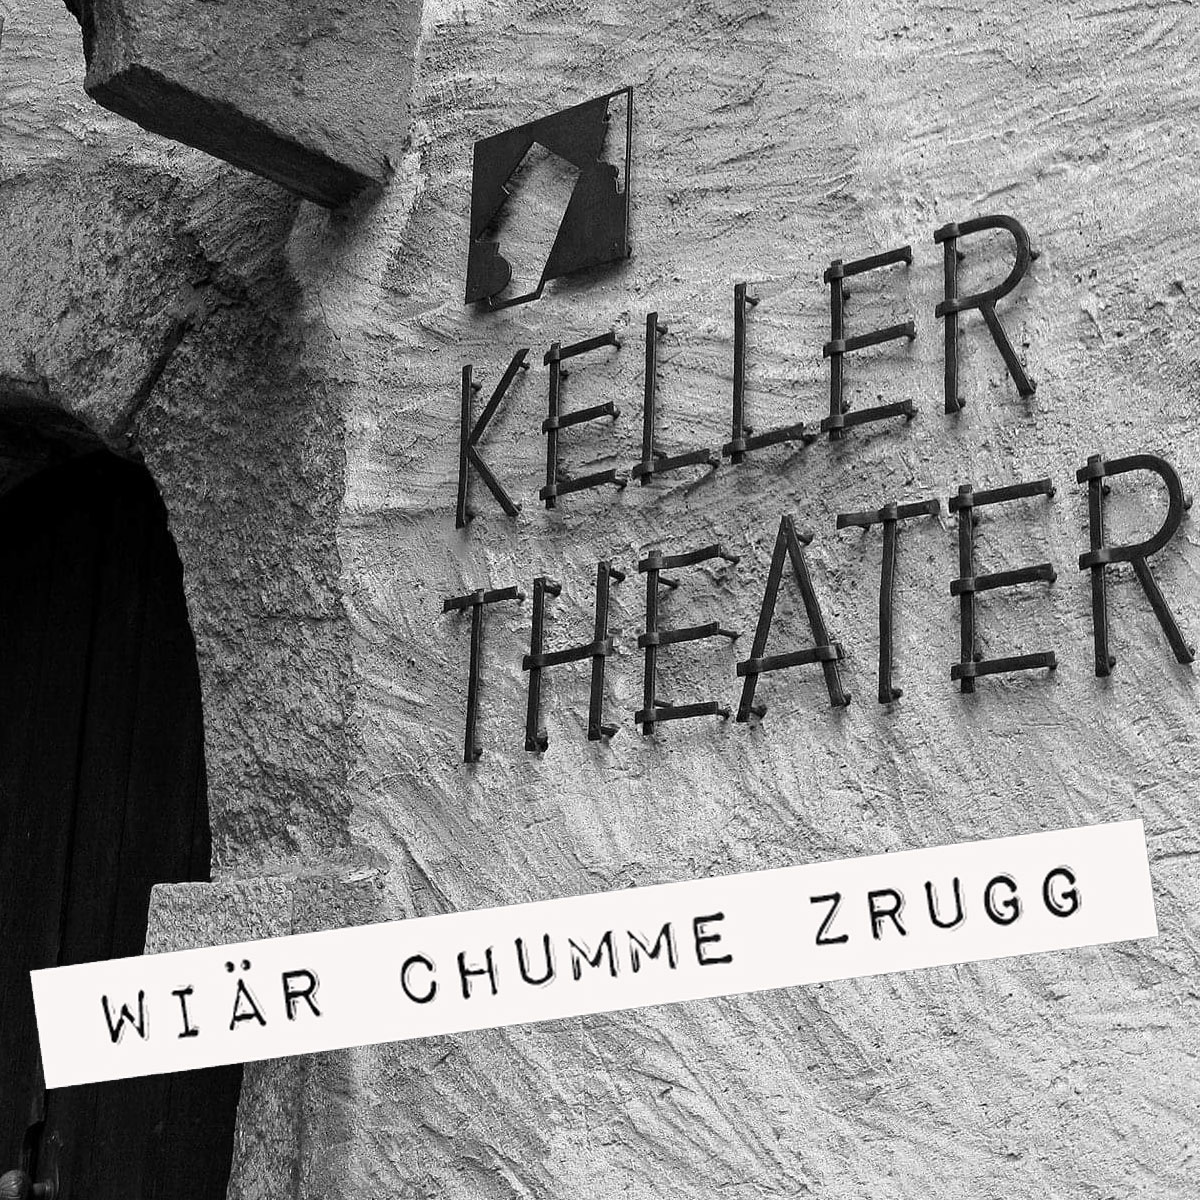 Read more about the article Wiär chumme zrugg